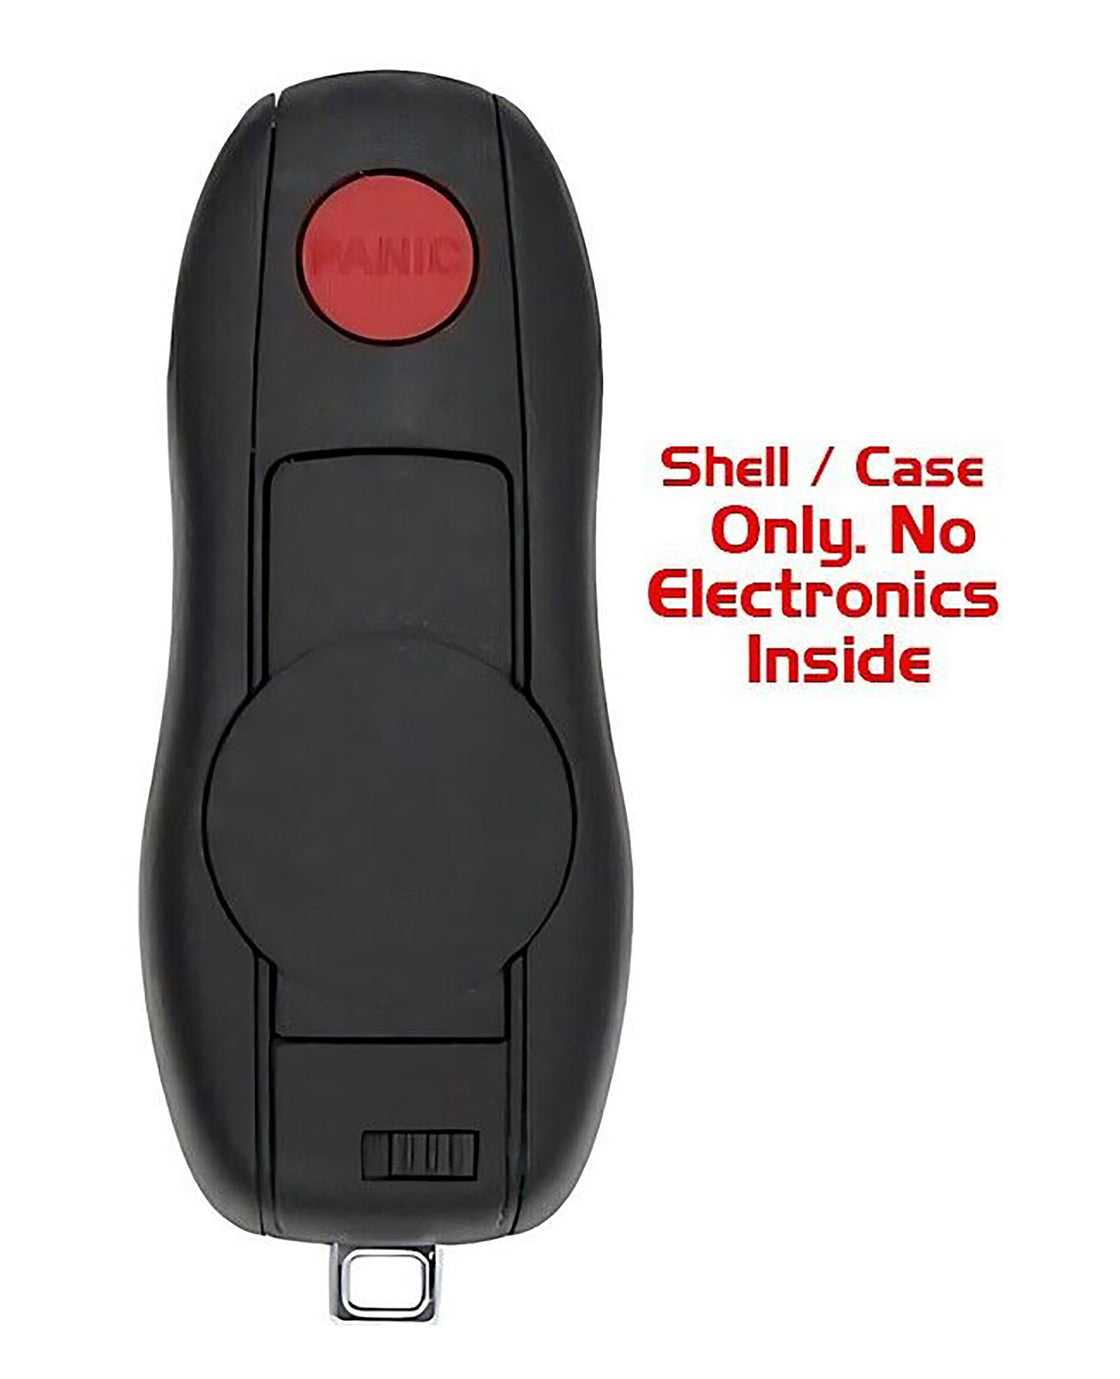 1x New Replacement Proxy Key Fob Remote SHELL / CASE Compatible with & Fit For Porsche Vehicles - MPN KR55WK50138-04 (NO electronics or Chip inside)